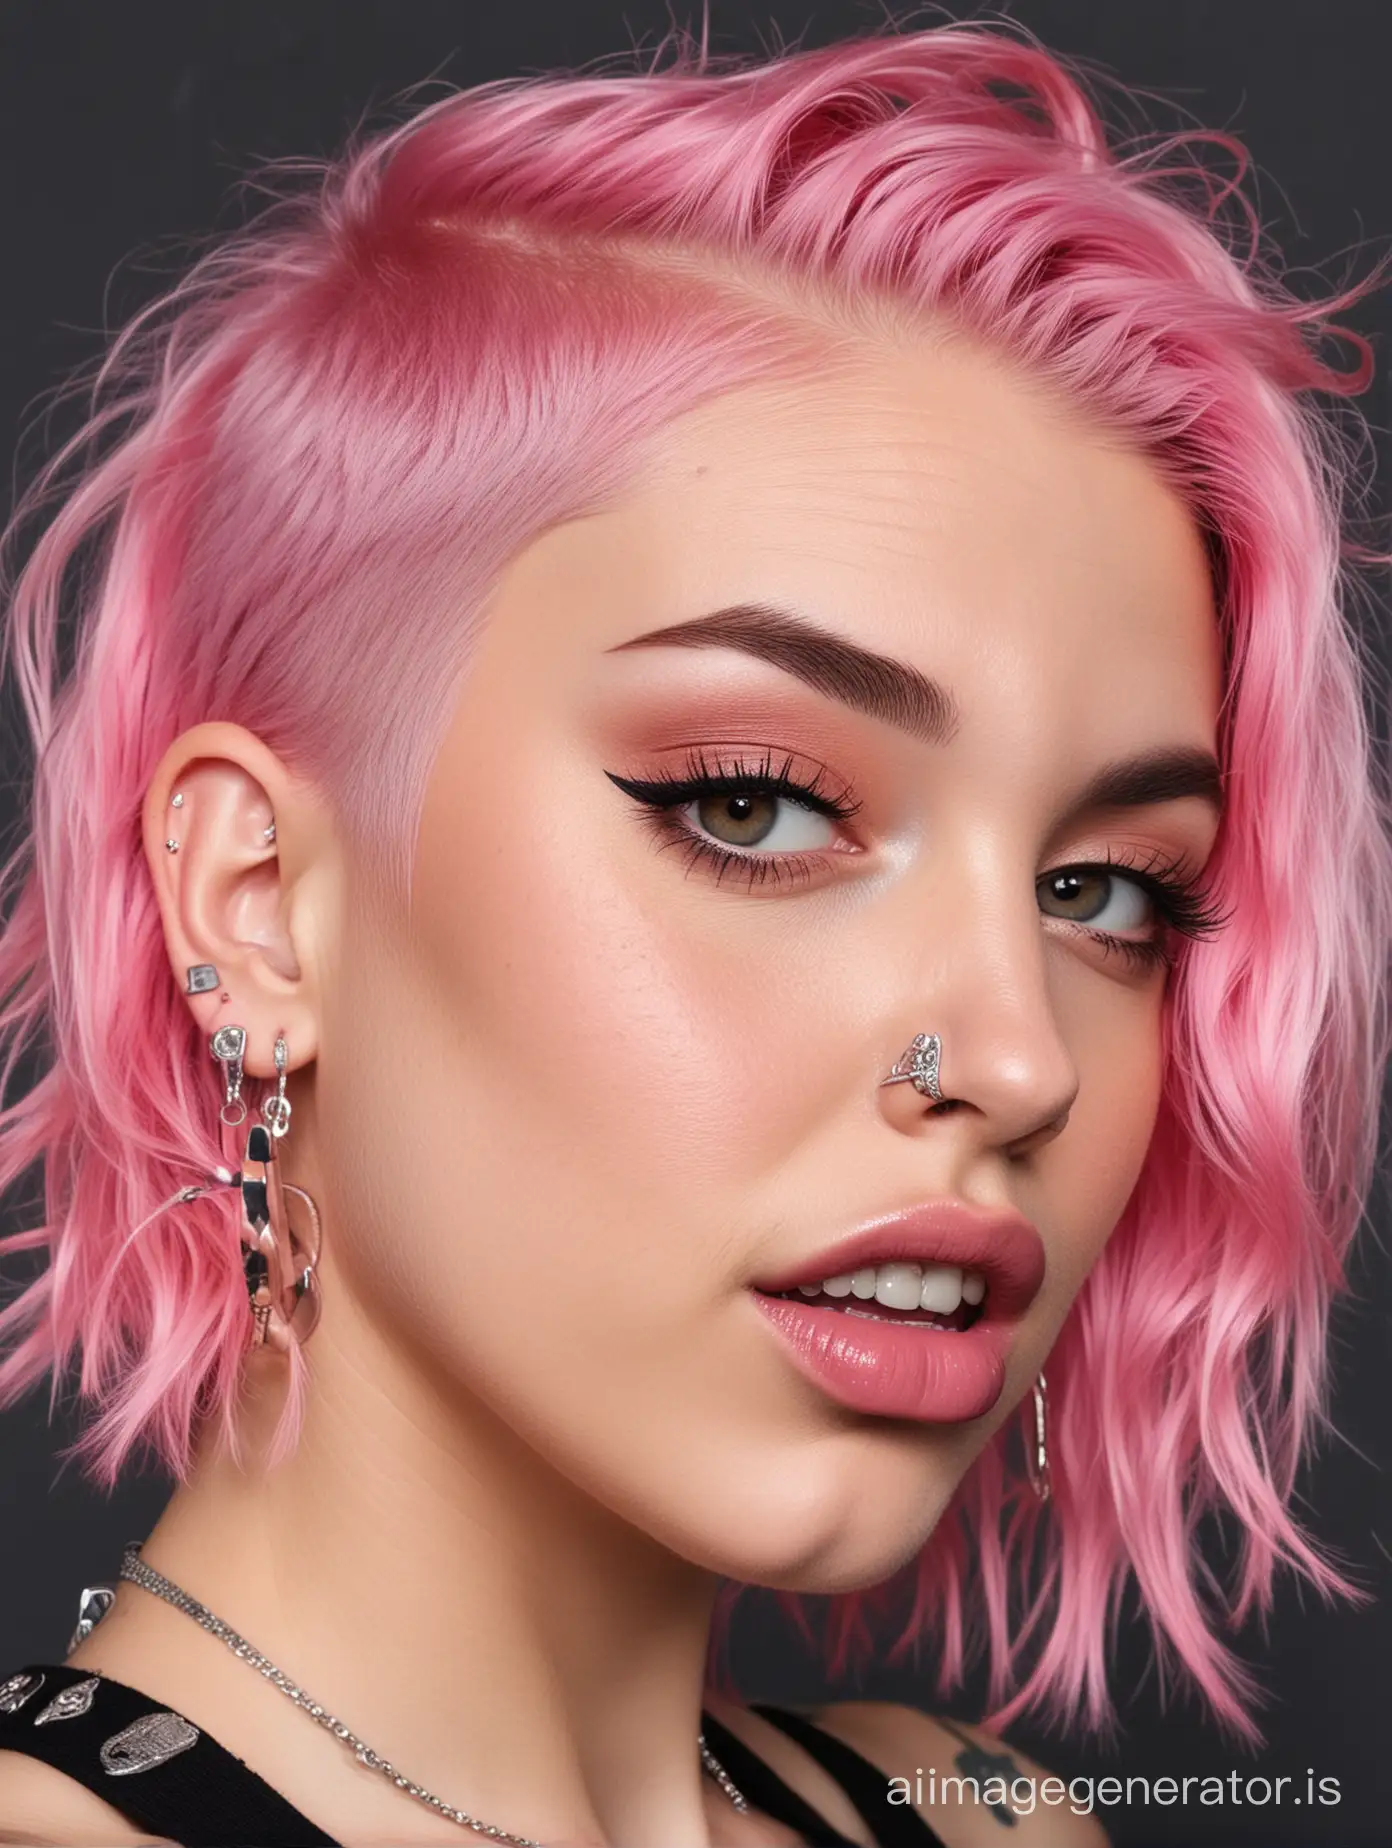 woman with side shaved undercut pink wavy hair, multiple ear piercings and pierced nose with a pierced eyebrow and tongue piercing